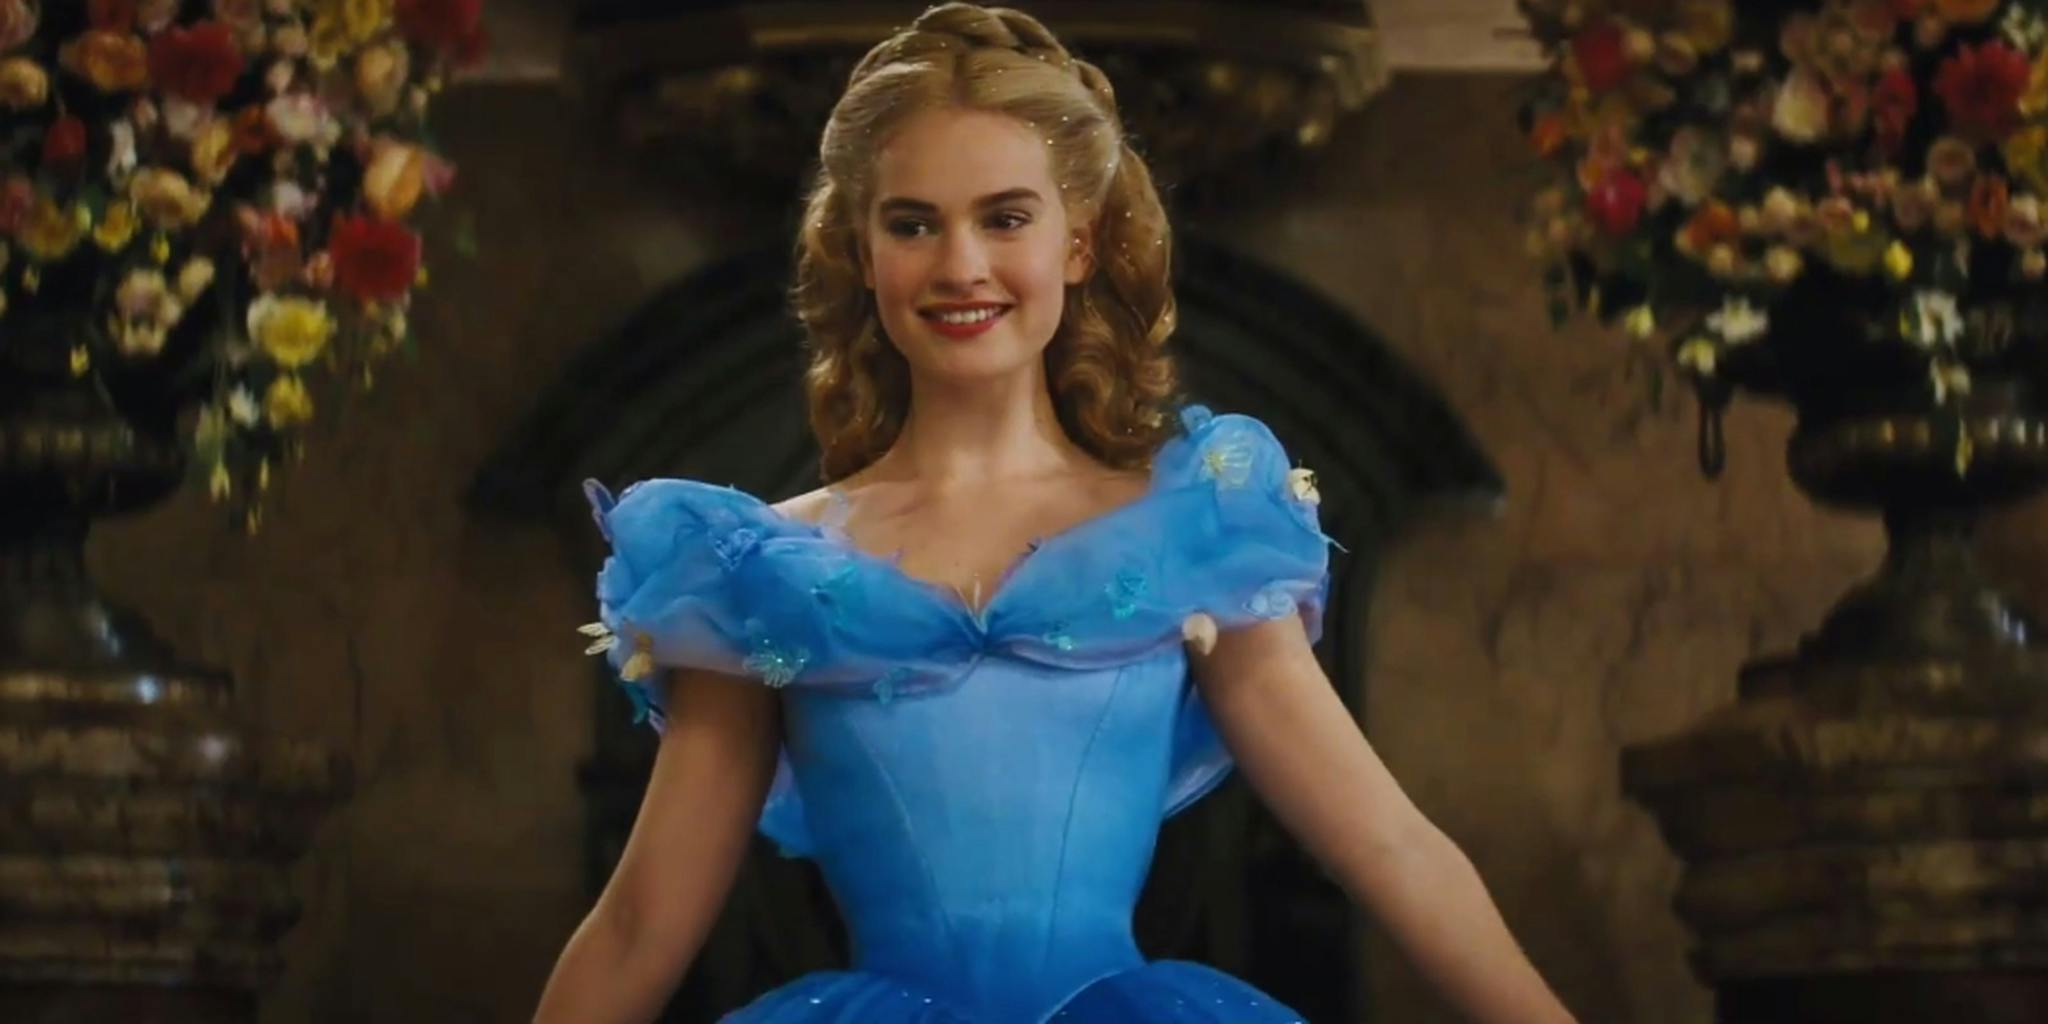 Here's the first trailer for Disney's new 'Cinderella' movie The